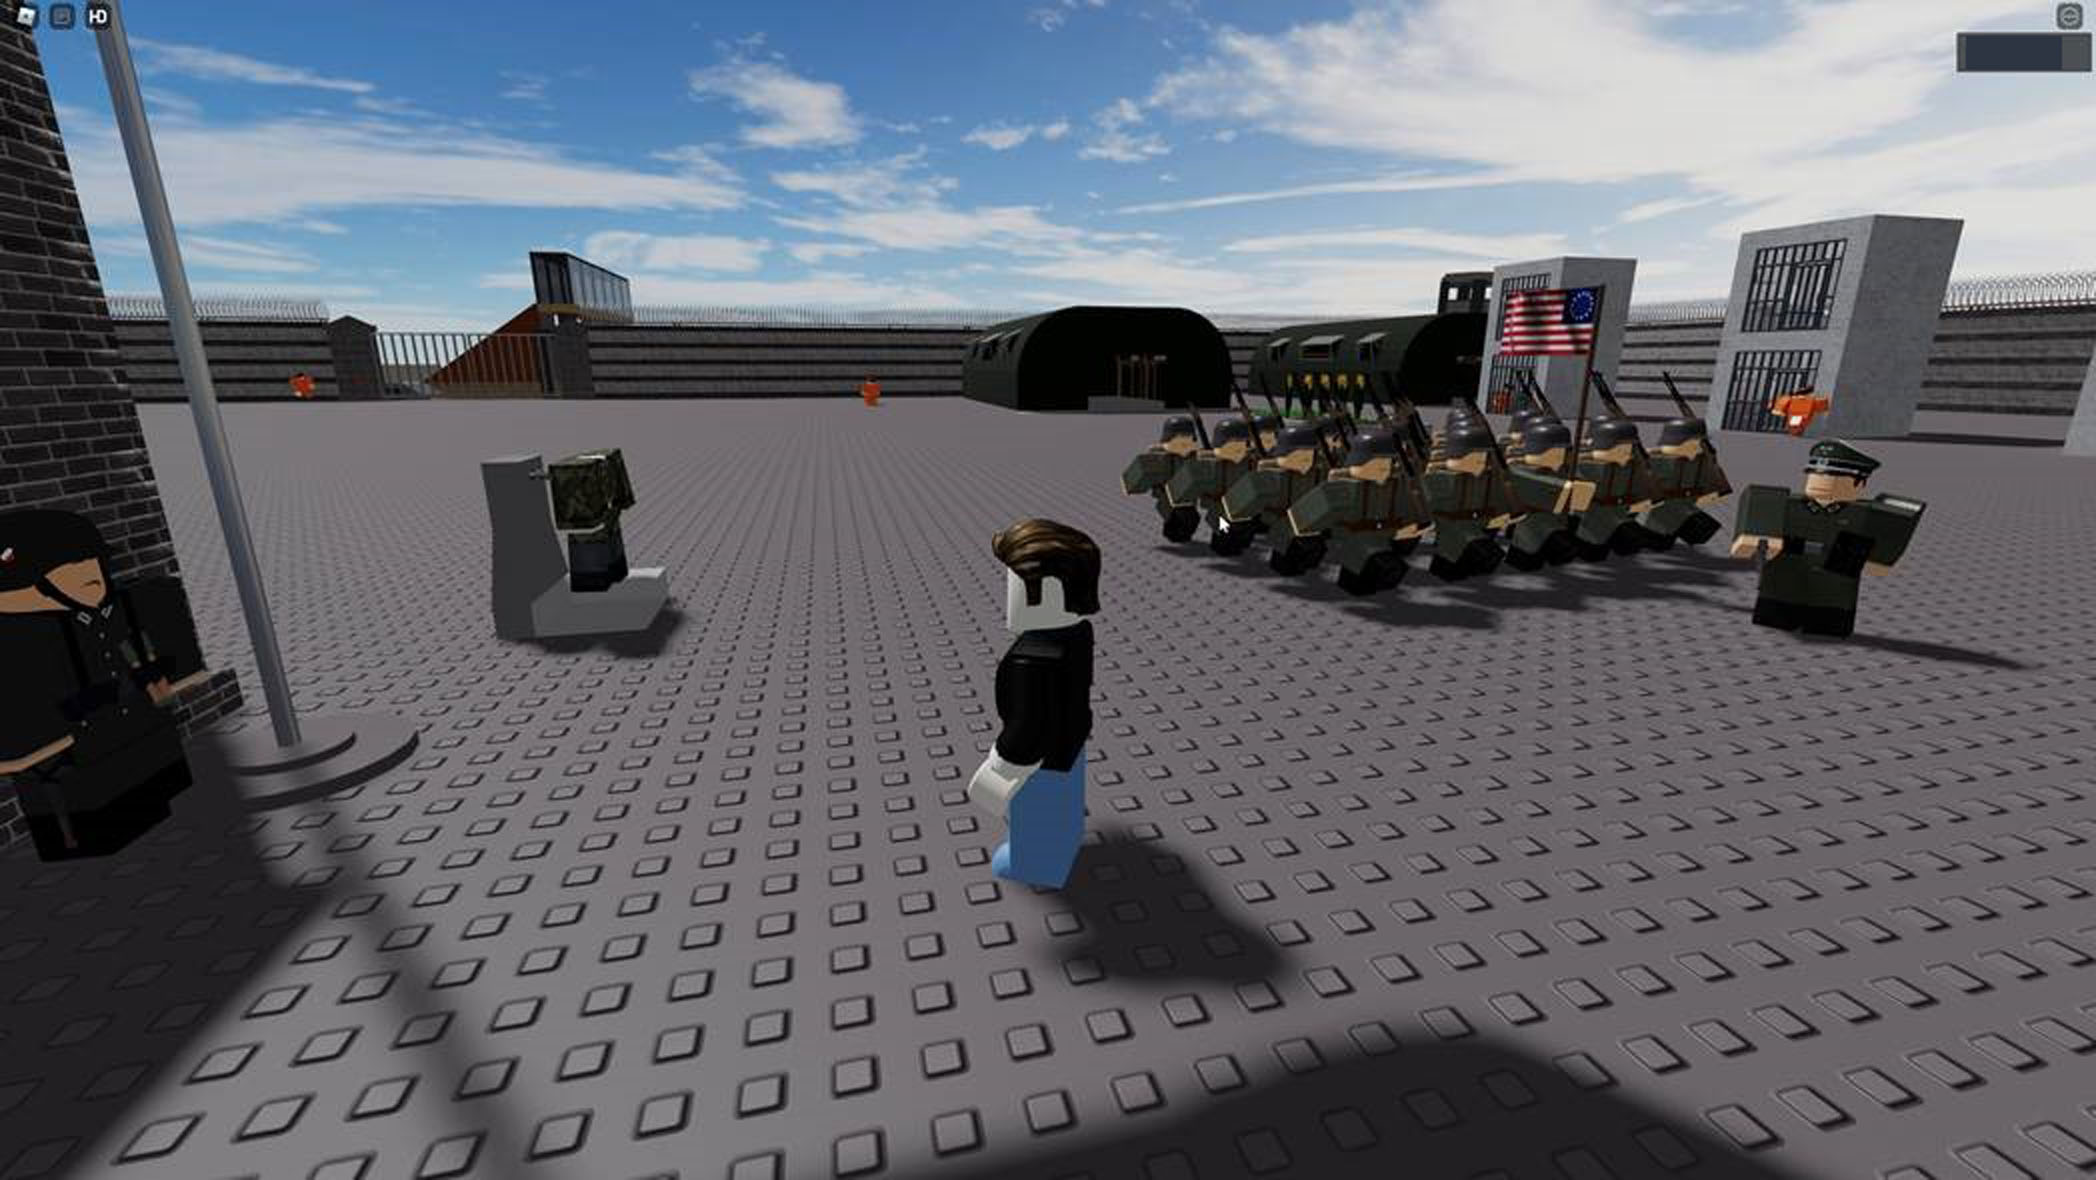 Welp, Roblox Just Removed a Nazi Concentration Camp From Its